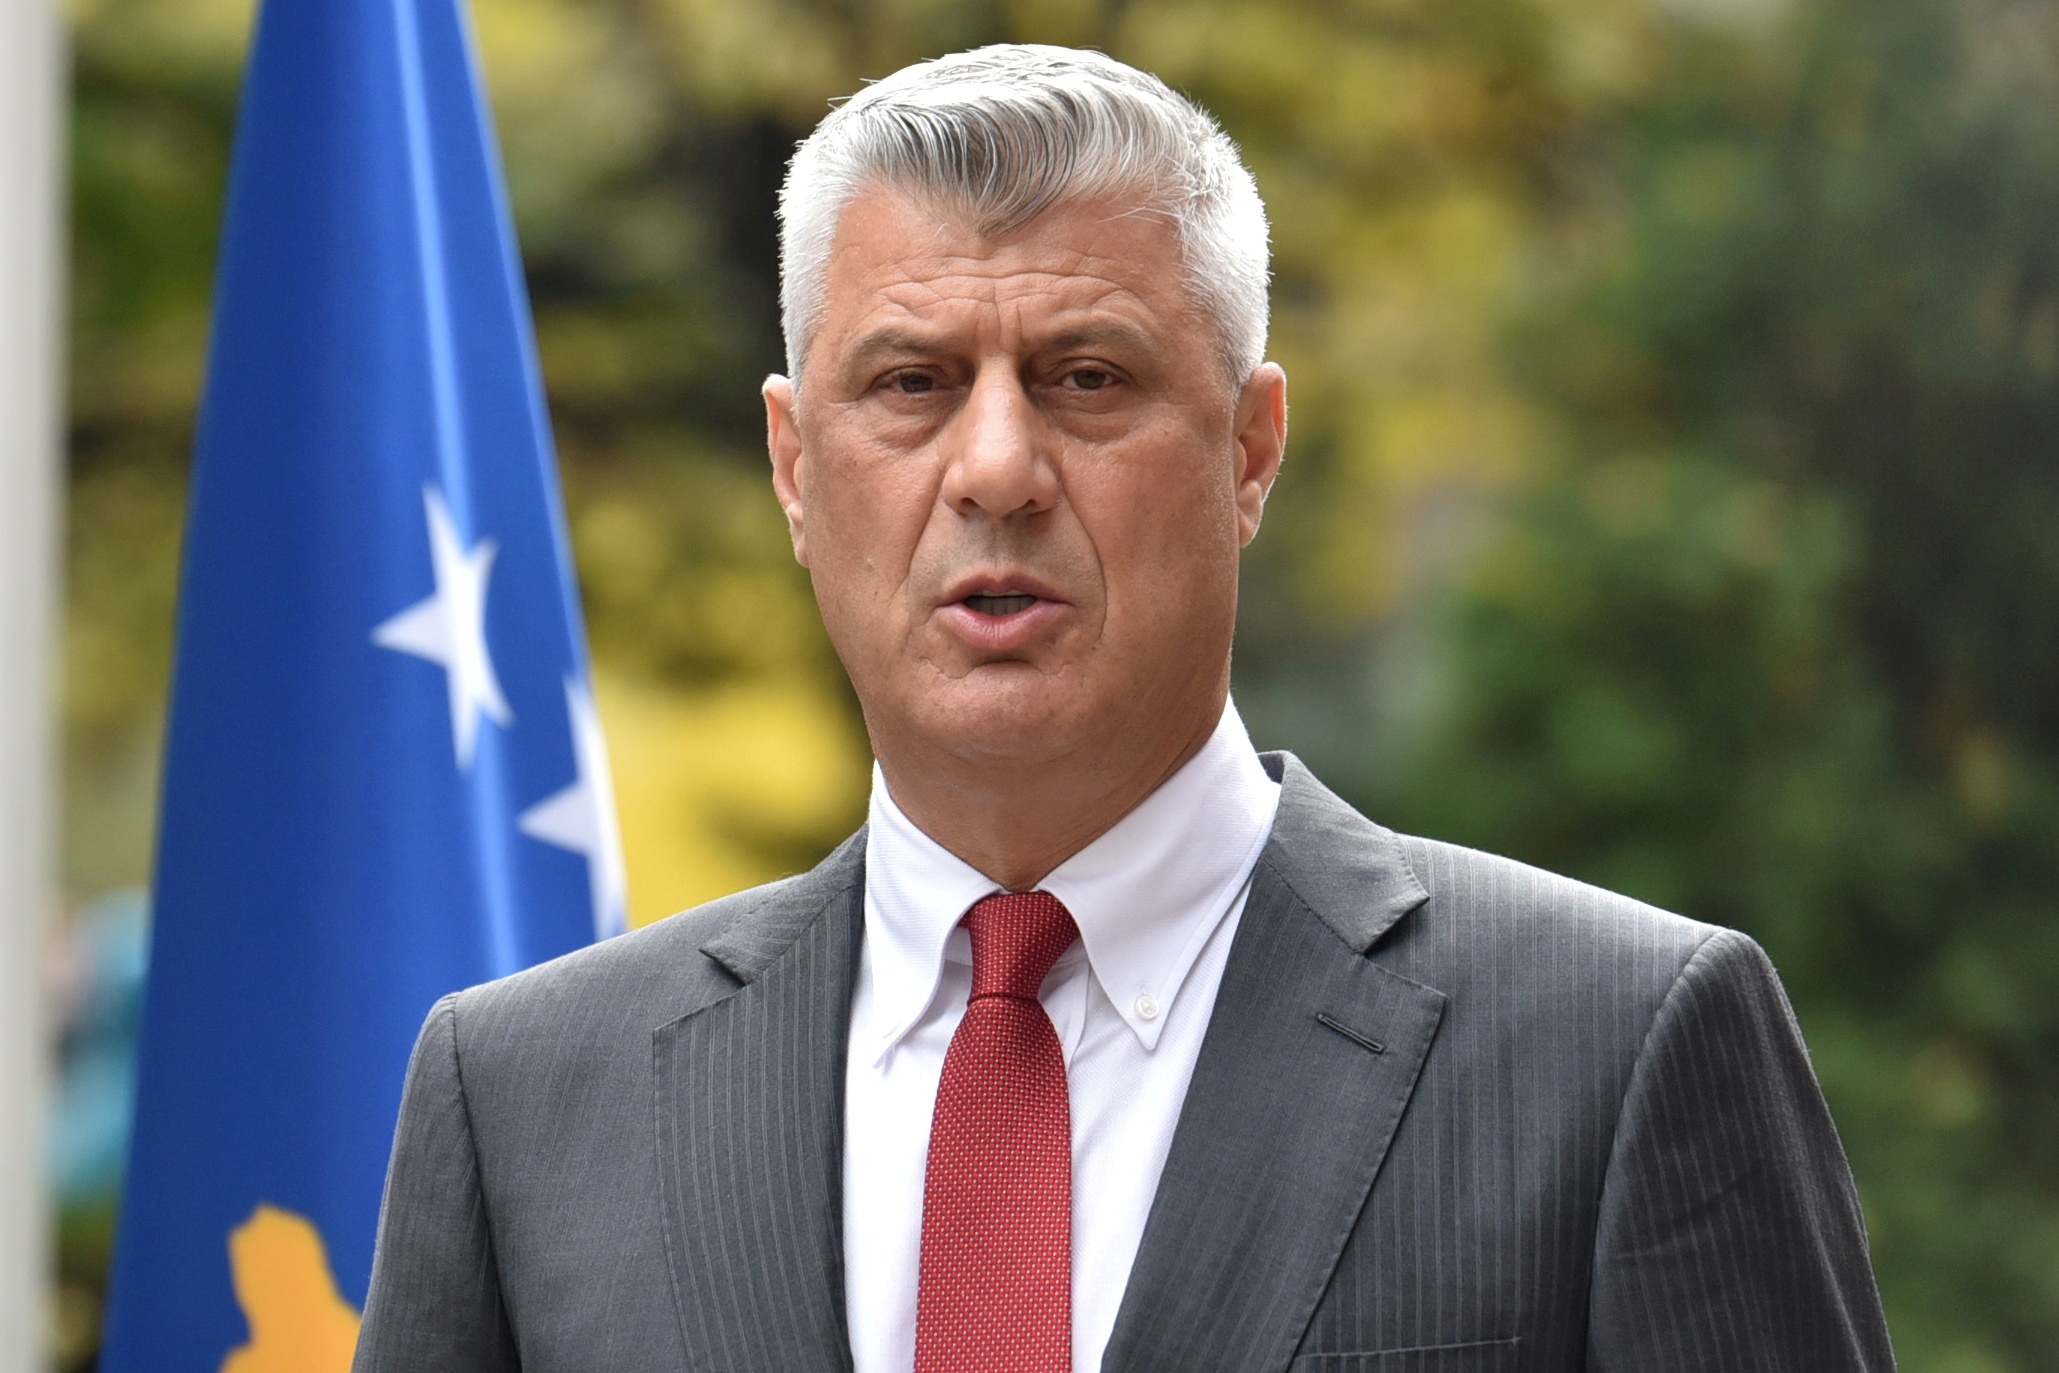 Kosovo's President Thaci is pictured during news conference as he resigns to face war crimes charges, in Pristina Kosovo's President Hashim Thaci speaks during a news conference as he resigns to face war crimes charges at a special court based in the Hague, in Pristina, Kosovo, November 5, 2020. REUTERS/Laura Hasani REFILE - CORRECTING INFORMATION LAURA HASANI